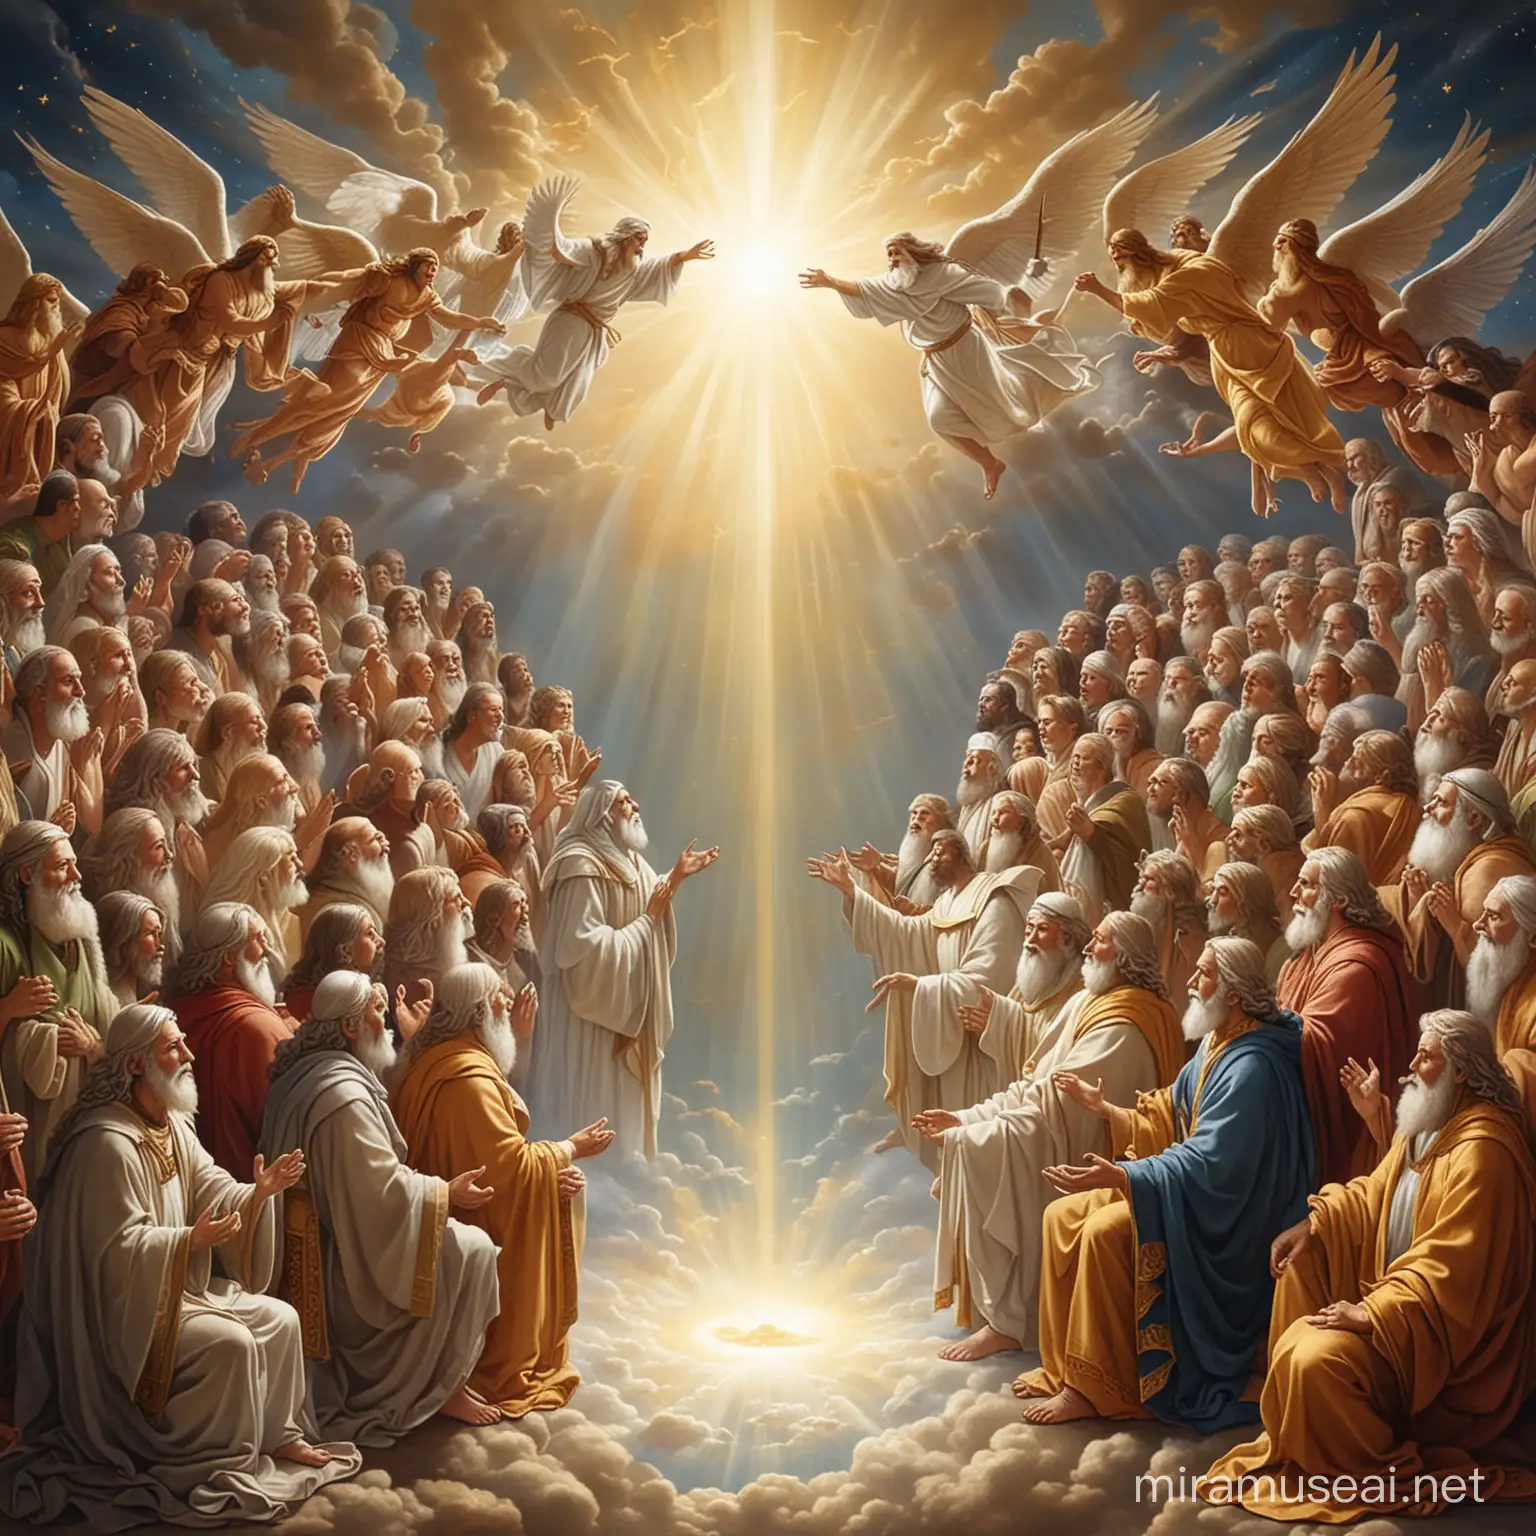 all god of wisdom meeting togather in the heaven